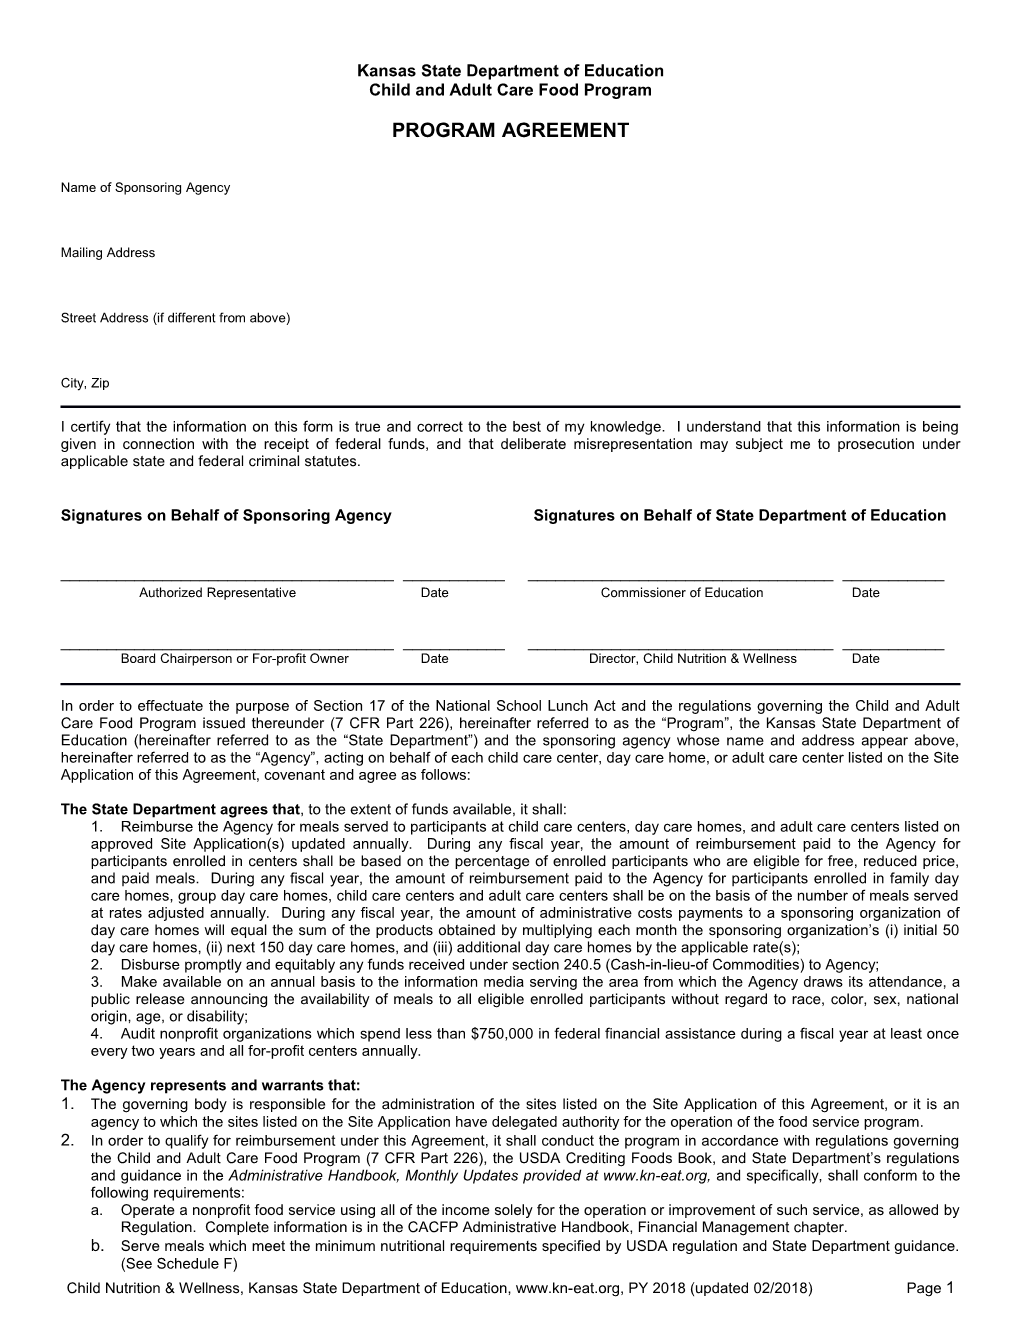 Program Agreement for Child and Adult Care Food Program